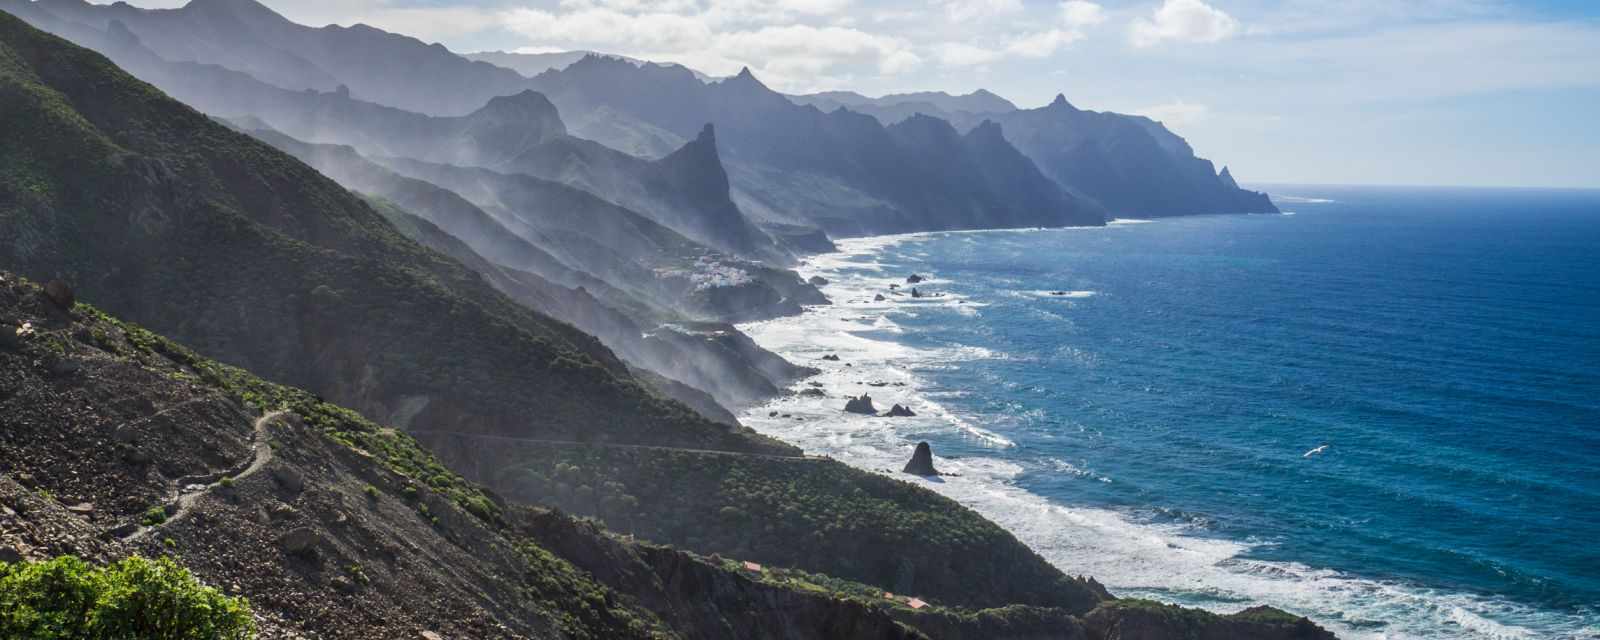 3 Best Hiking Trails in the Anaga Rural Park in Tenerife